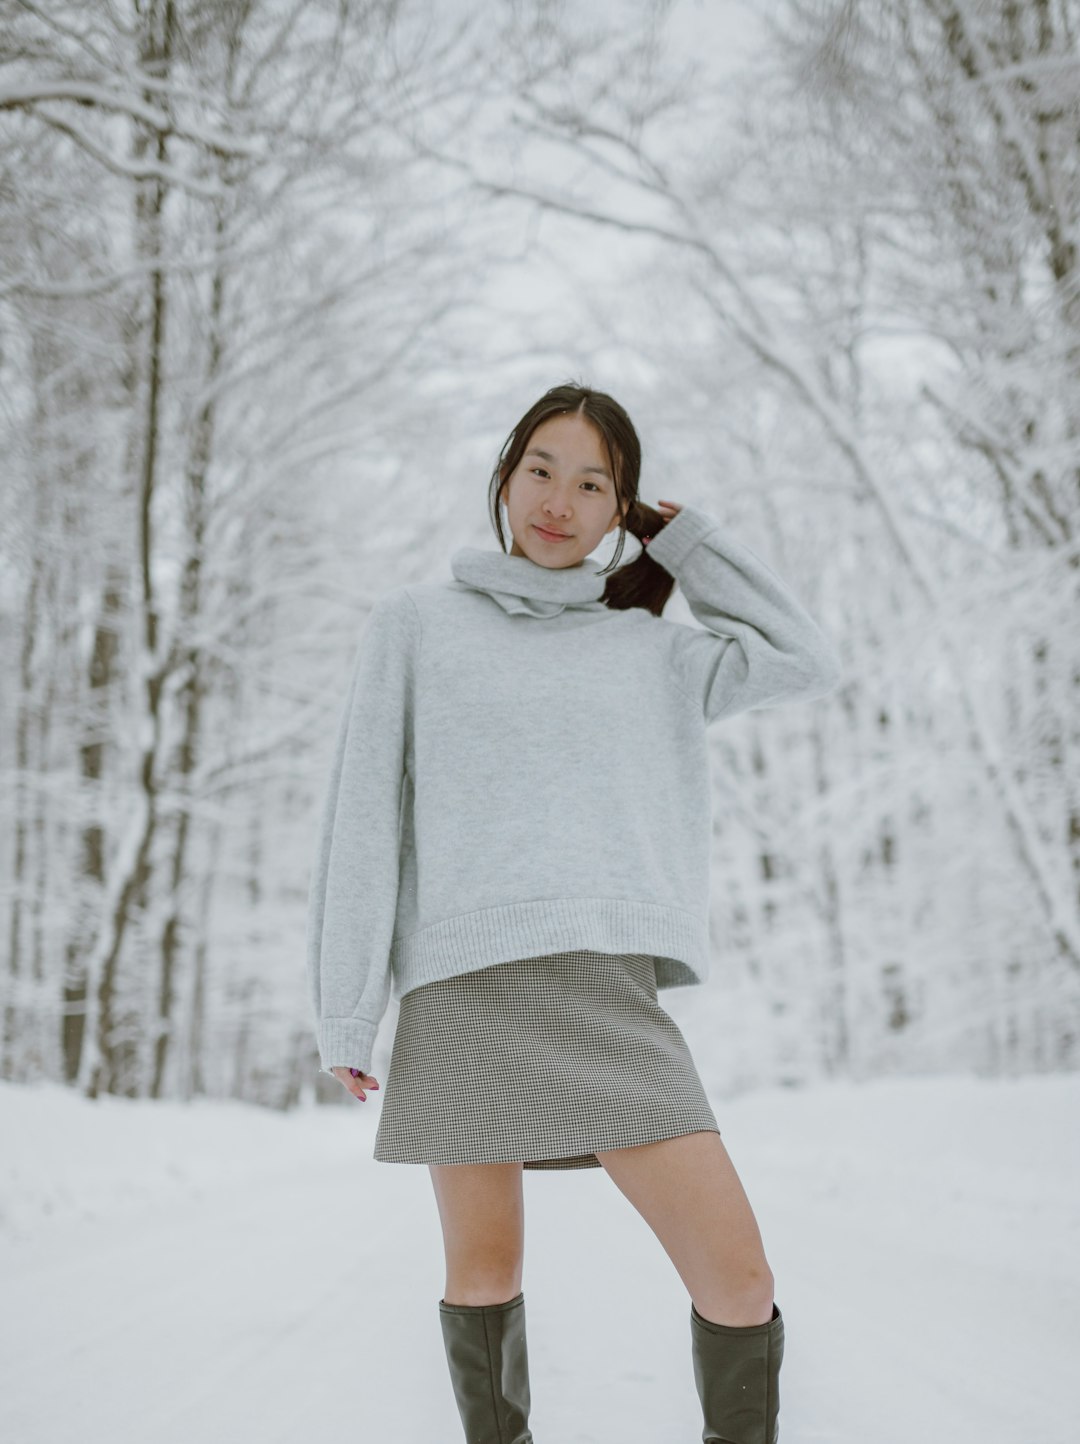 woman in white sweater standing on snow covered ground during daytime